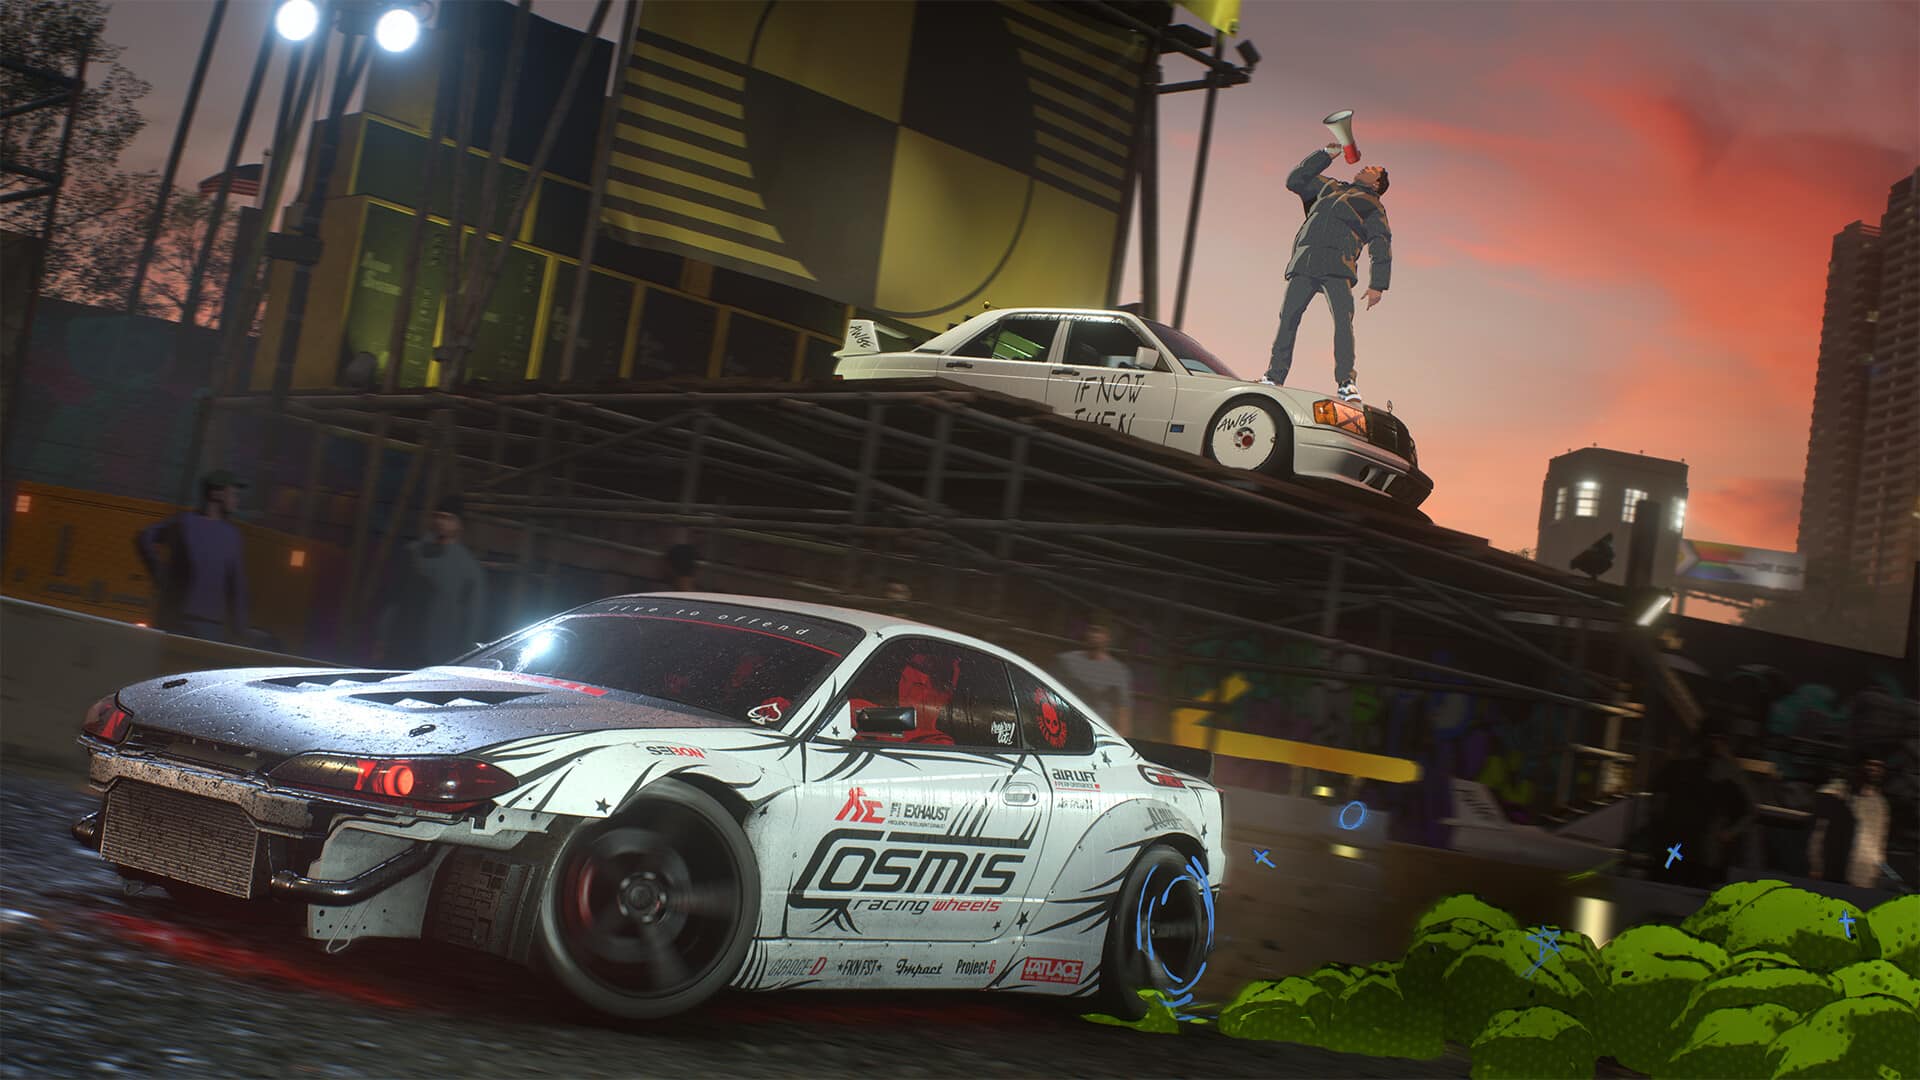 Need for Speed Unbound Review: Colourful but predictable